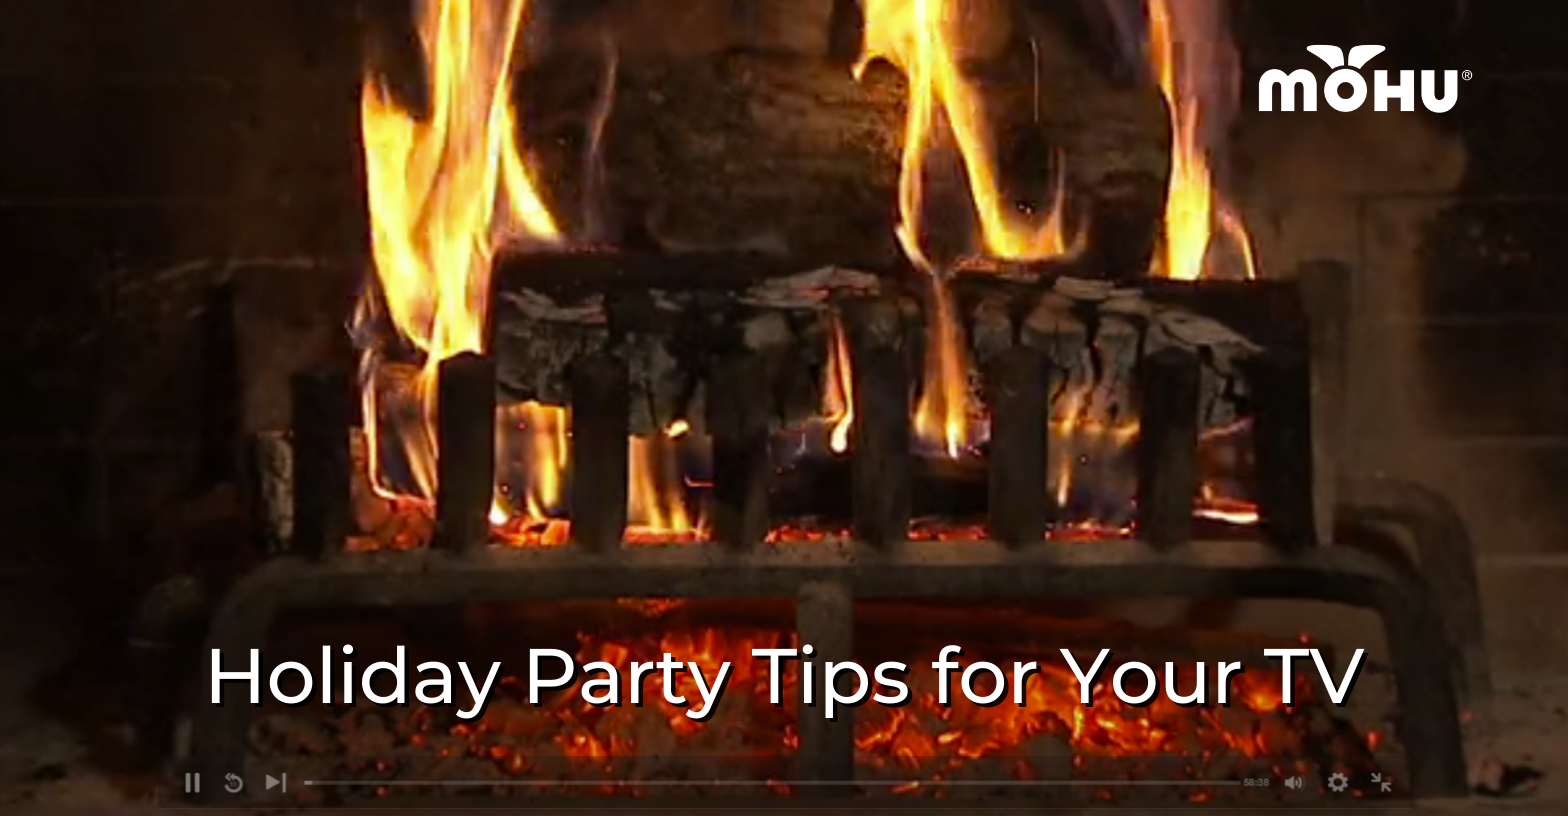 Paused video of a burning Yule log fire, Holiday Party Tips for Your TV, Mohu logo